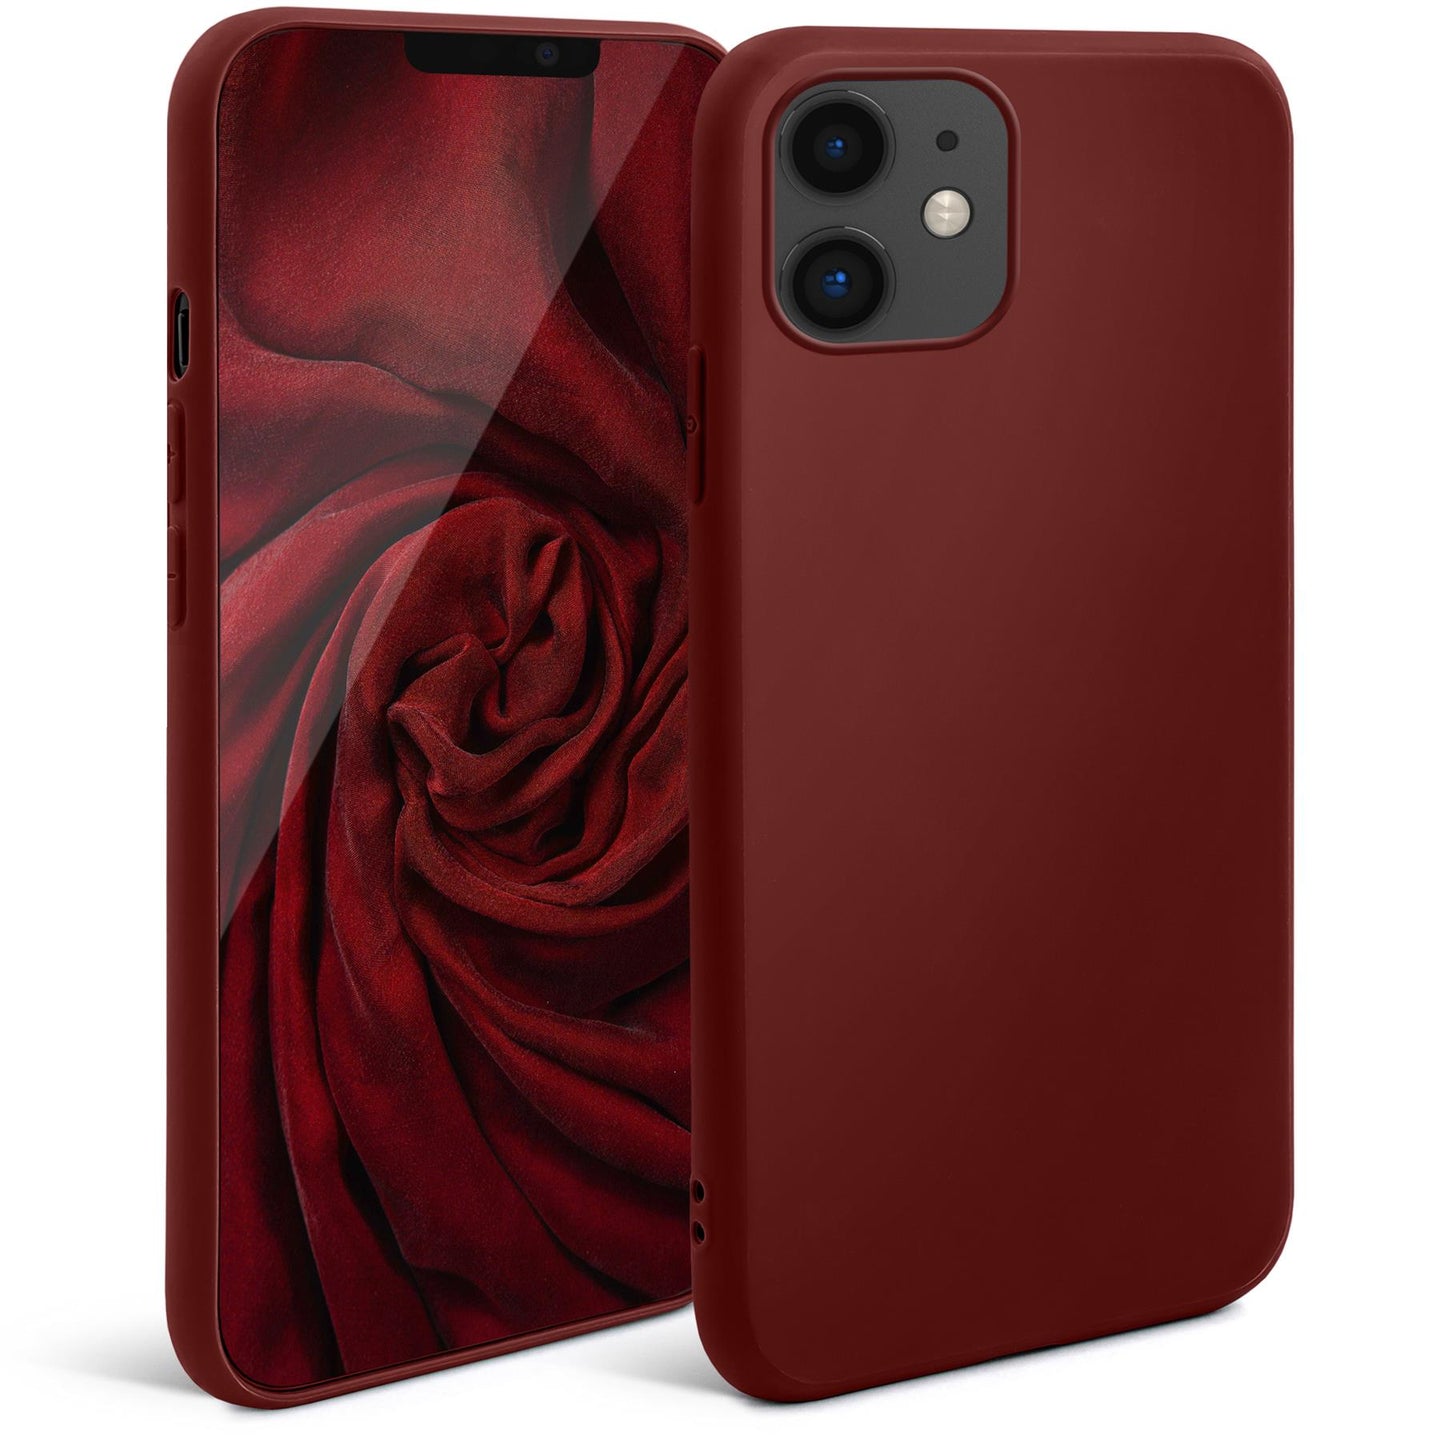 Moozy Minimalist Series Silicone Case for iPhone 11, Wine Red - Matte Finish Slim Soft TPU Cover